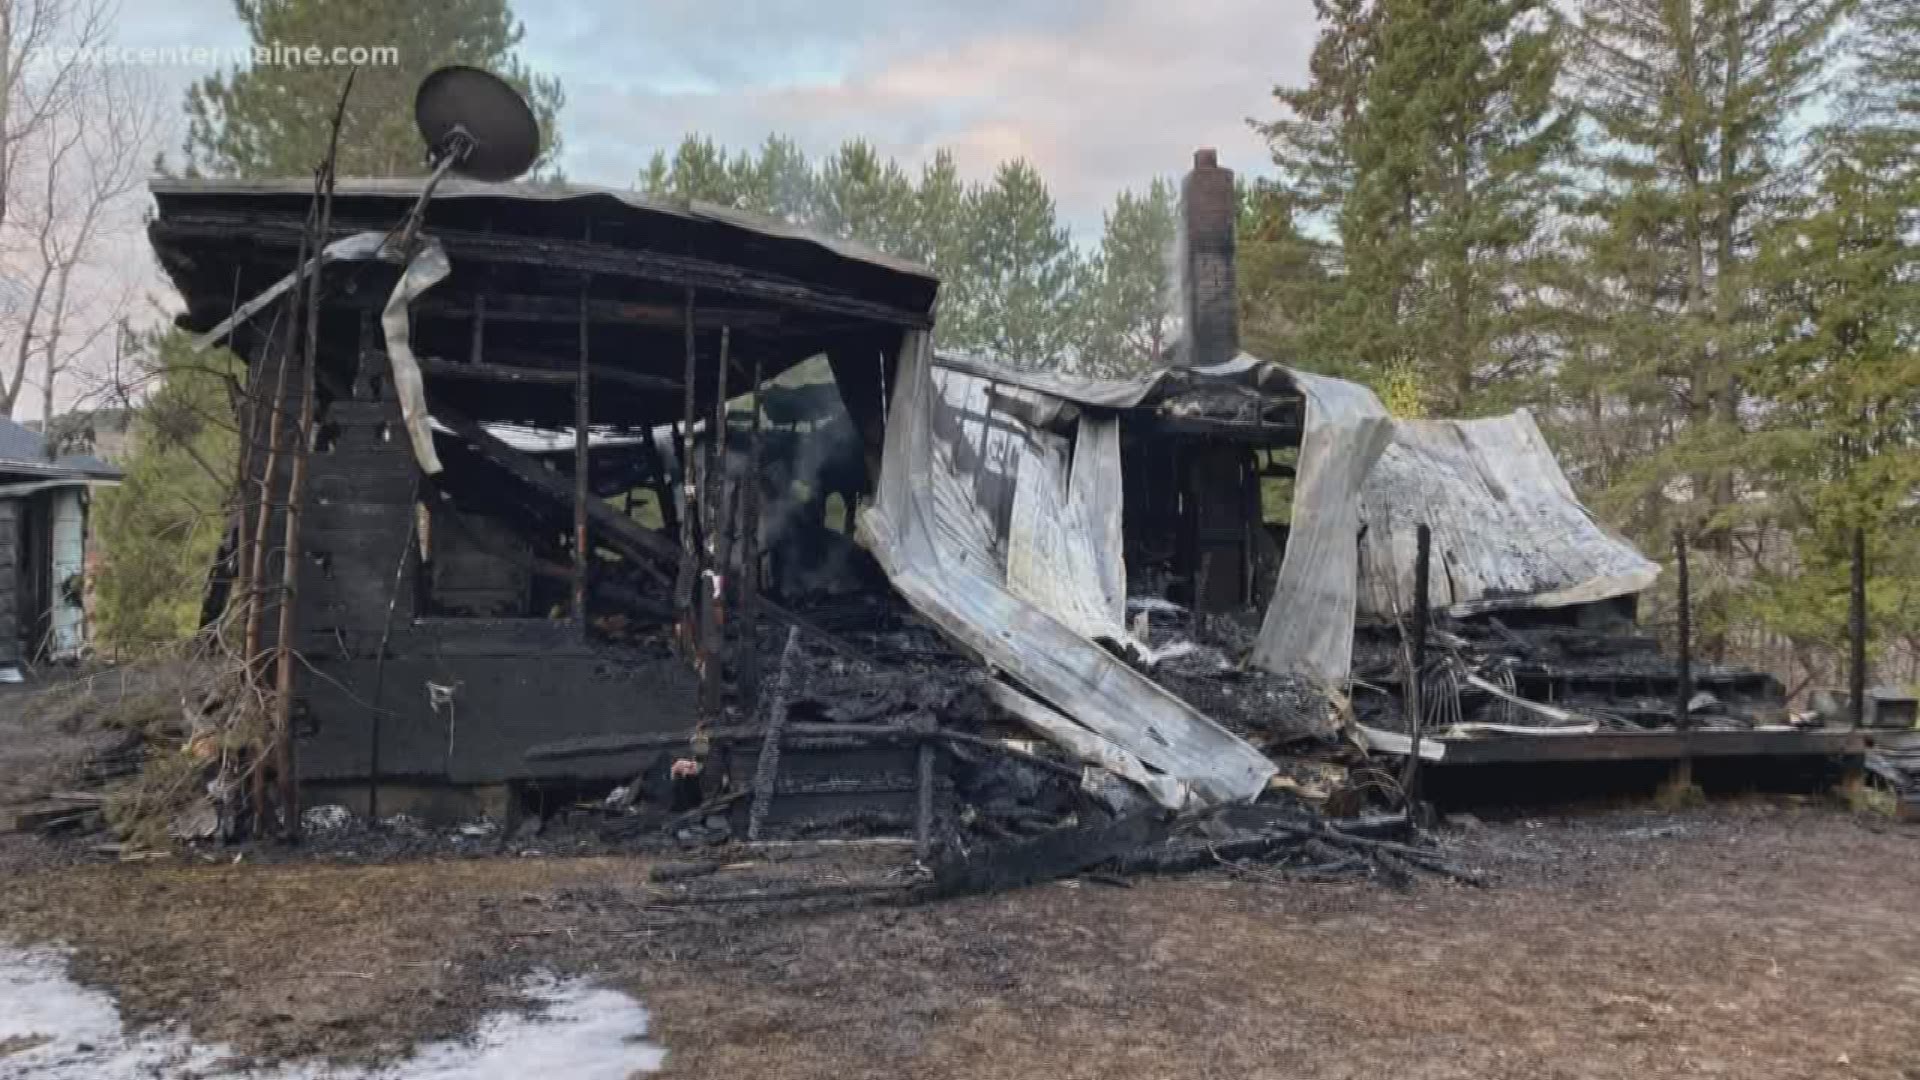 A Fort Fairfield family made it out of a devastating fire Saturday morning, but lost everything as a result. Town officials are asking for donations to help